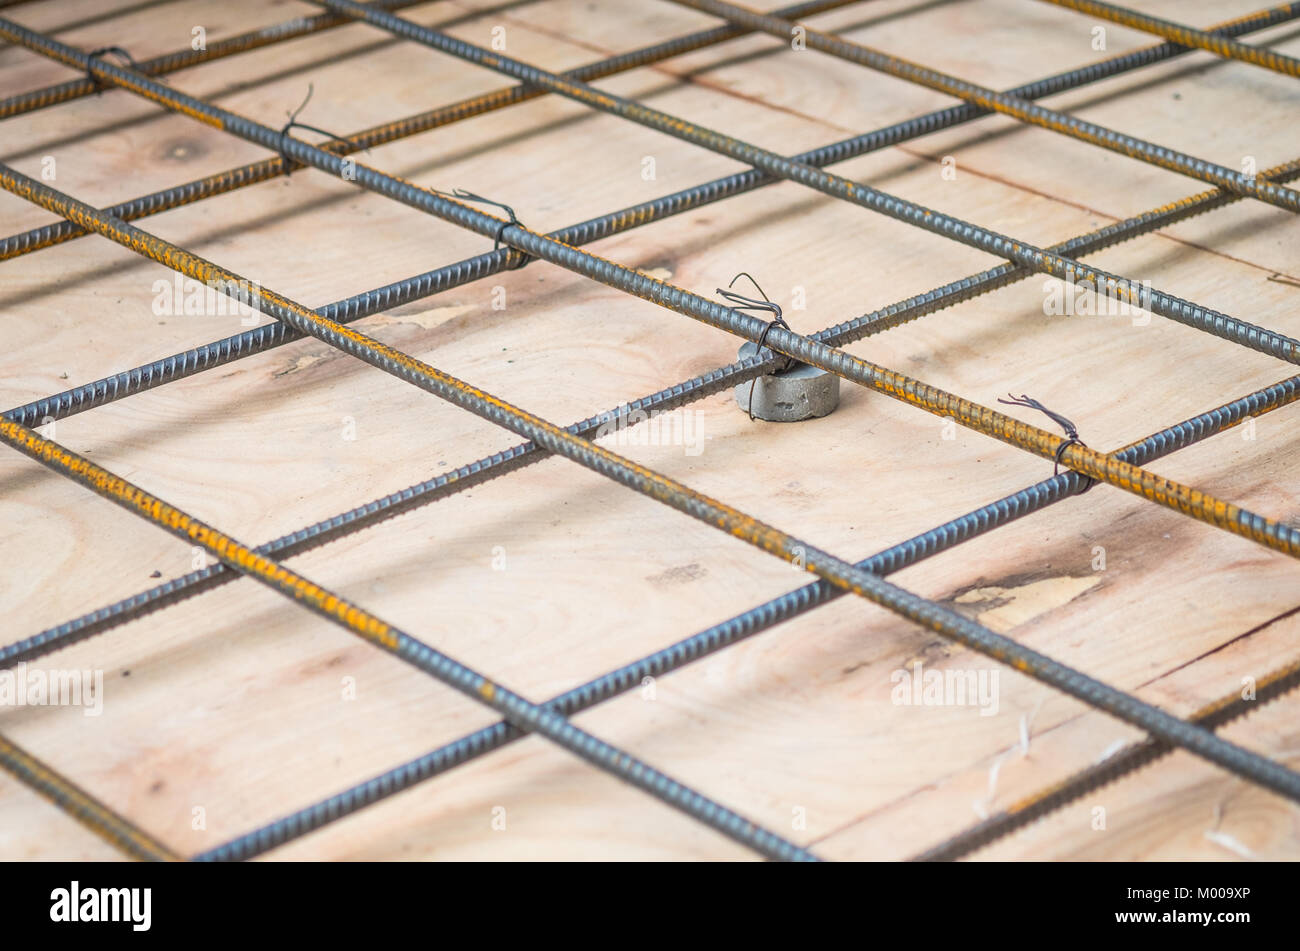 Rebars steel wire mesh, which is supported by mortar cover box and wooden plate for precast concrete flooring on construction site, selective focus. Stock Photo